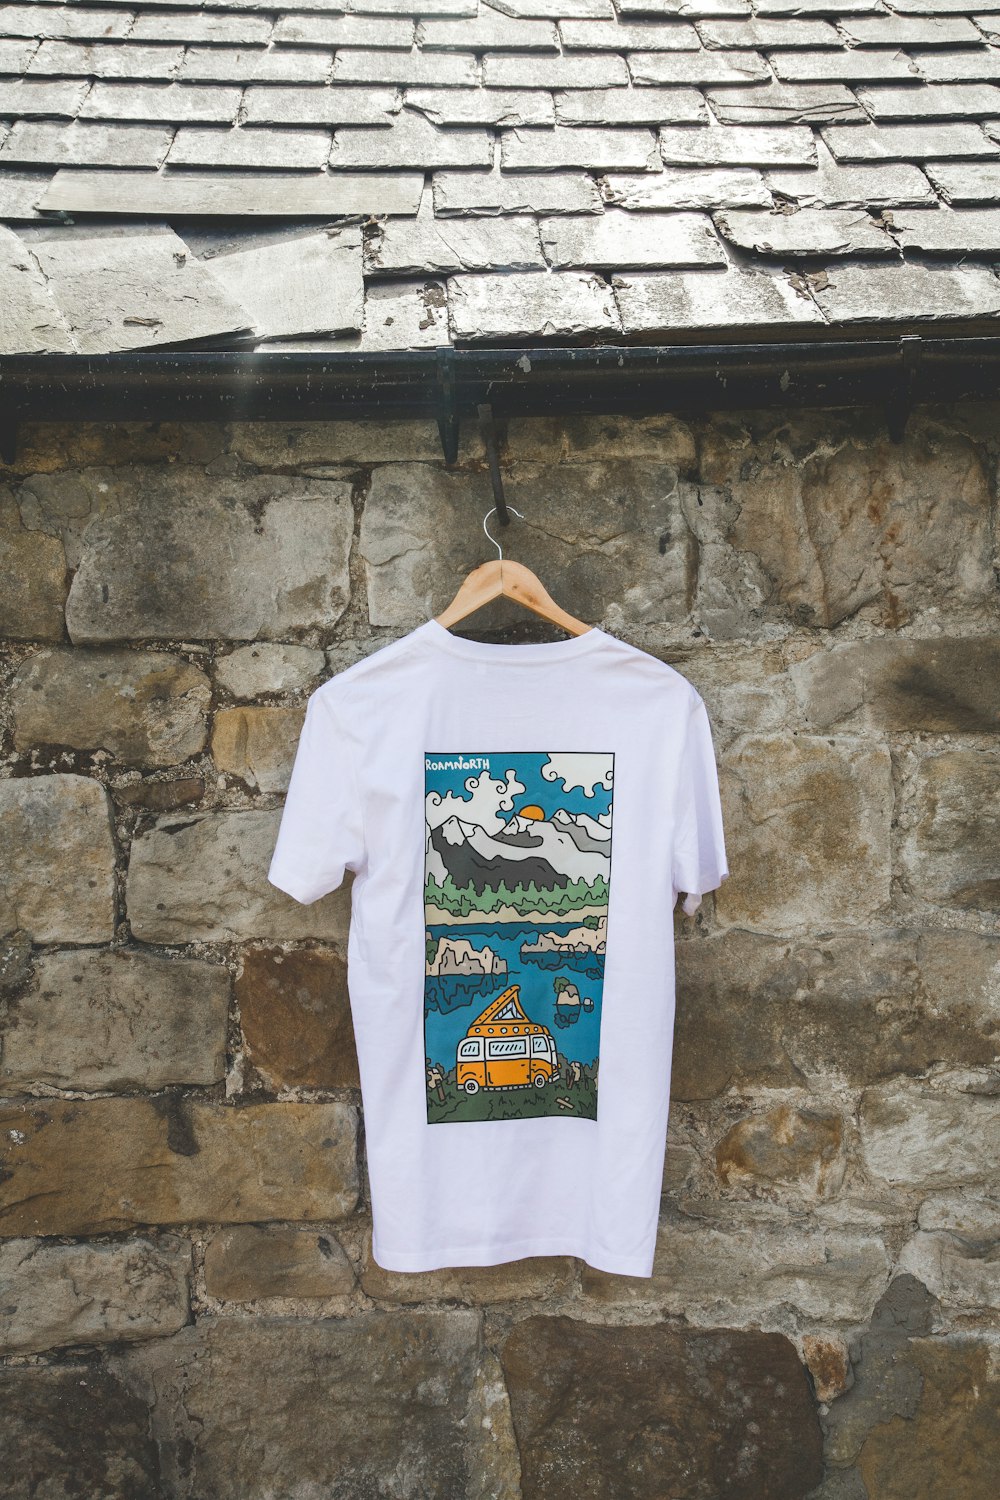 a white t - shirt hanging on a stone wall